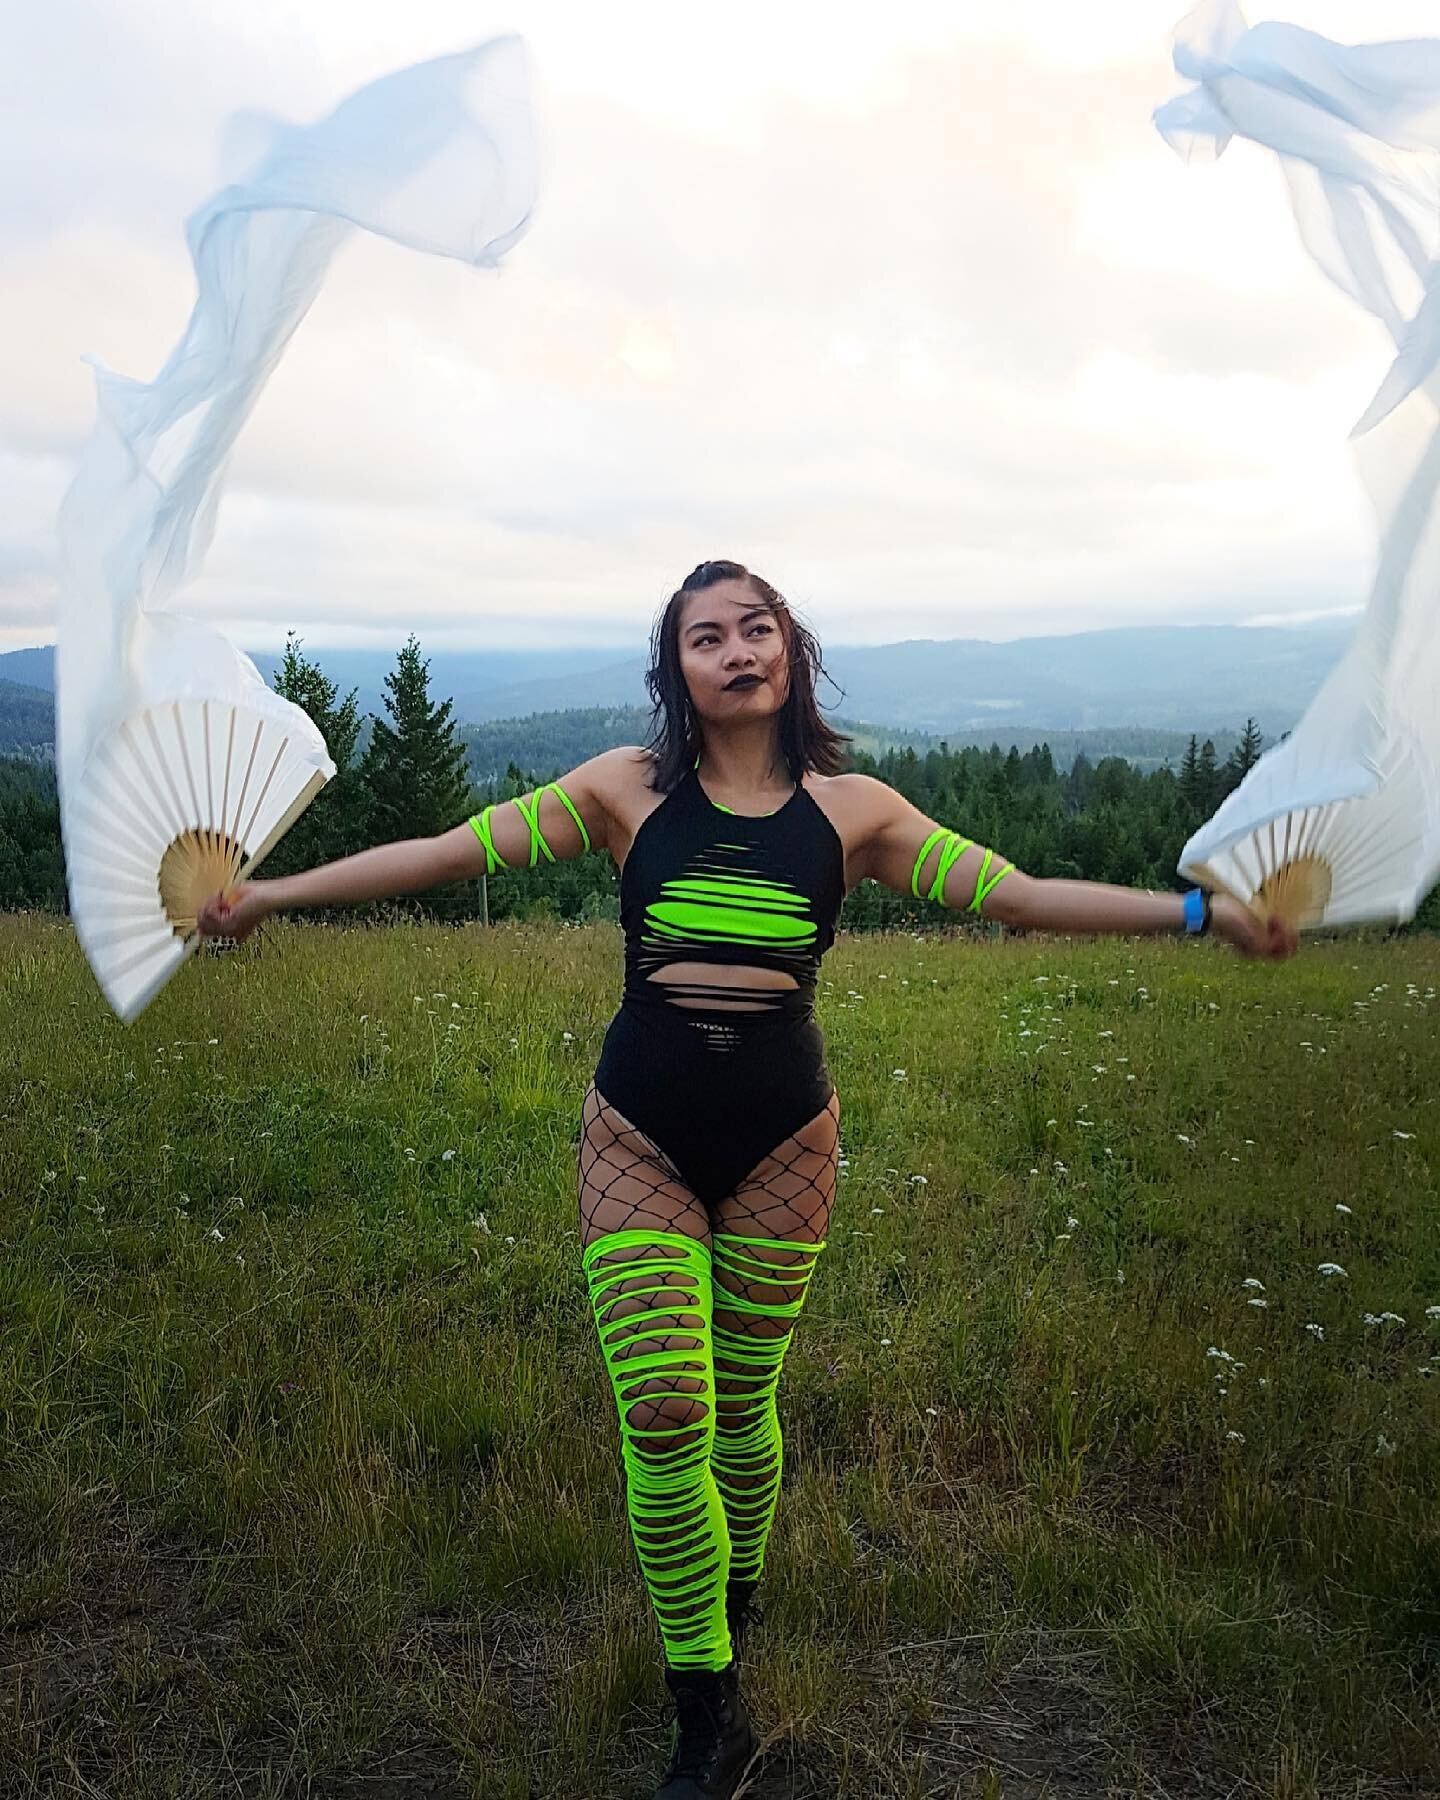 Millie Bee grew up dancing ballet in the Philippines, then hip hop and contemporary dance after moving to Canada in 2003. Having recently discovered her love for flow arts in 2018, she has since performed for various collectives in Vancouver. Millie 